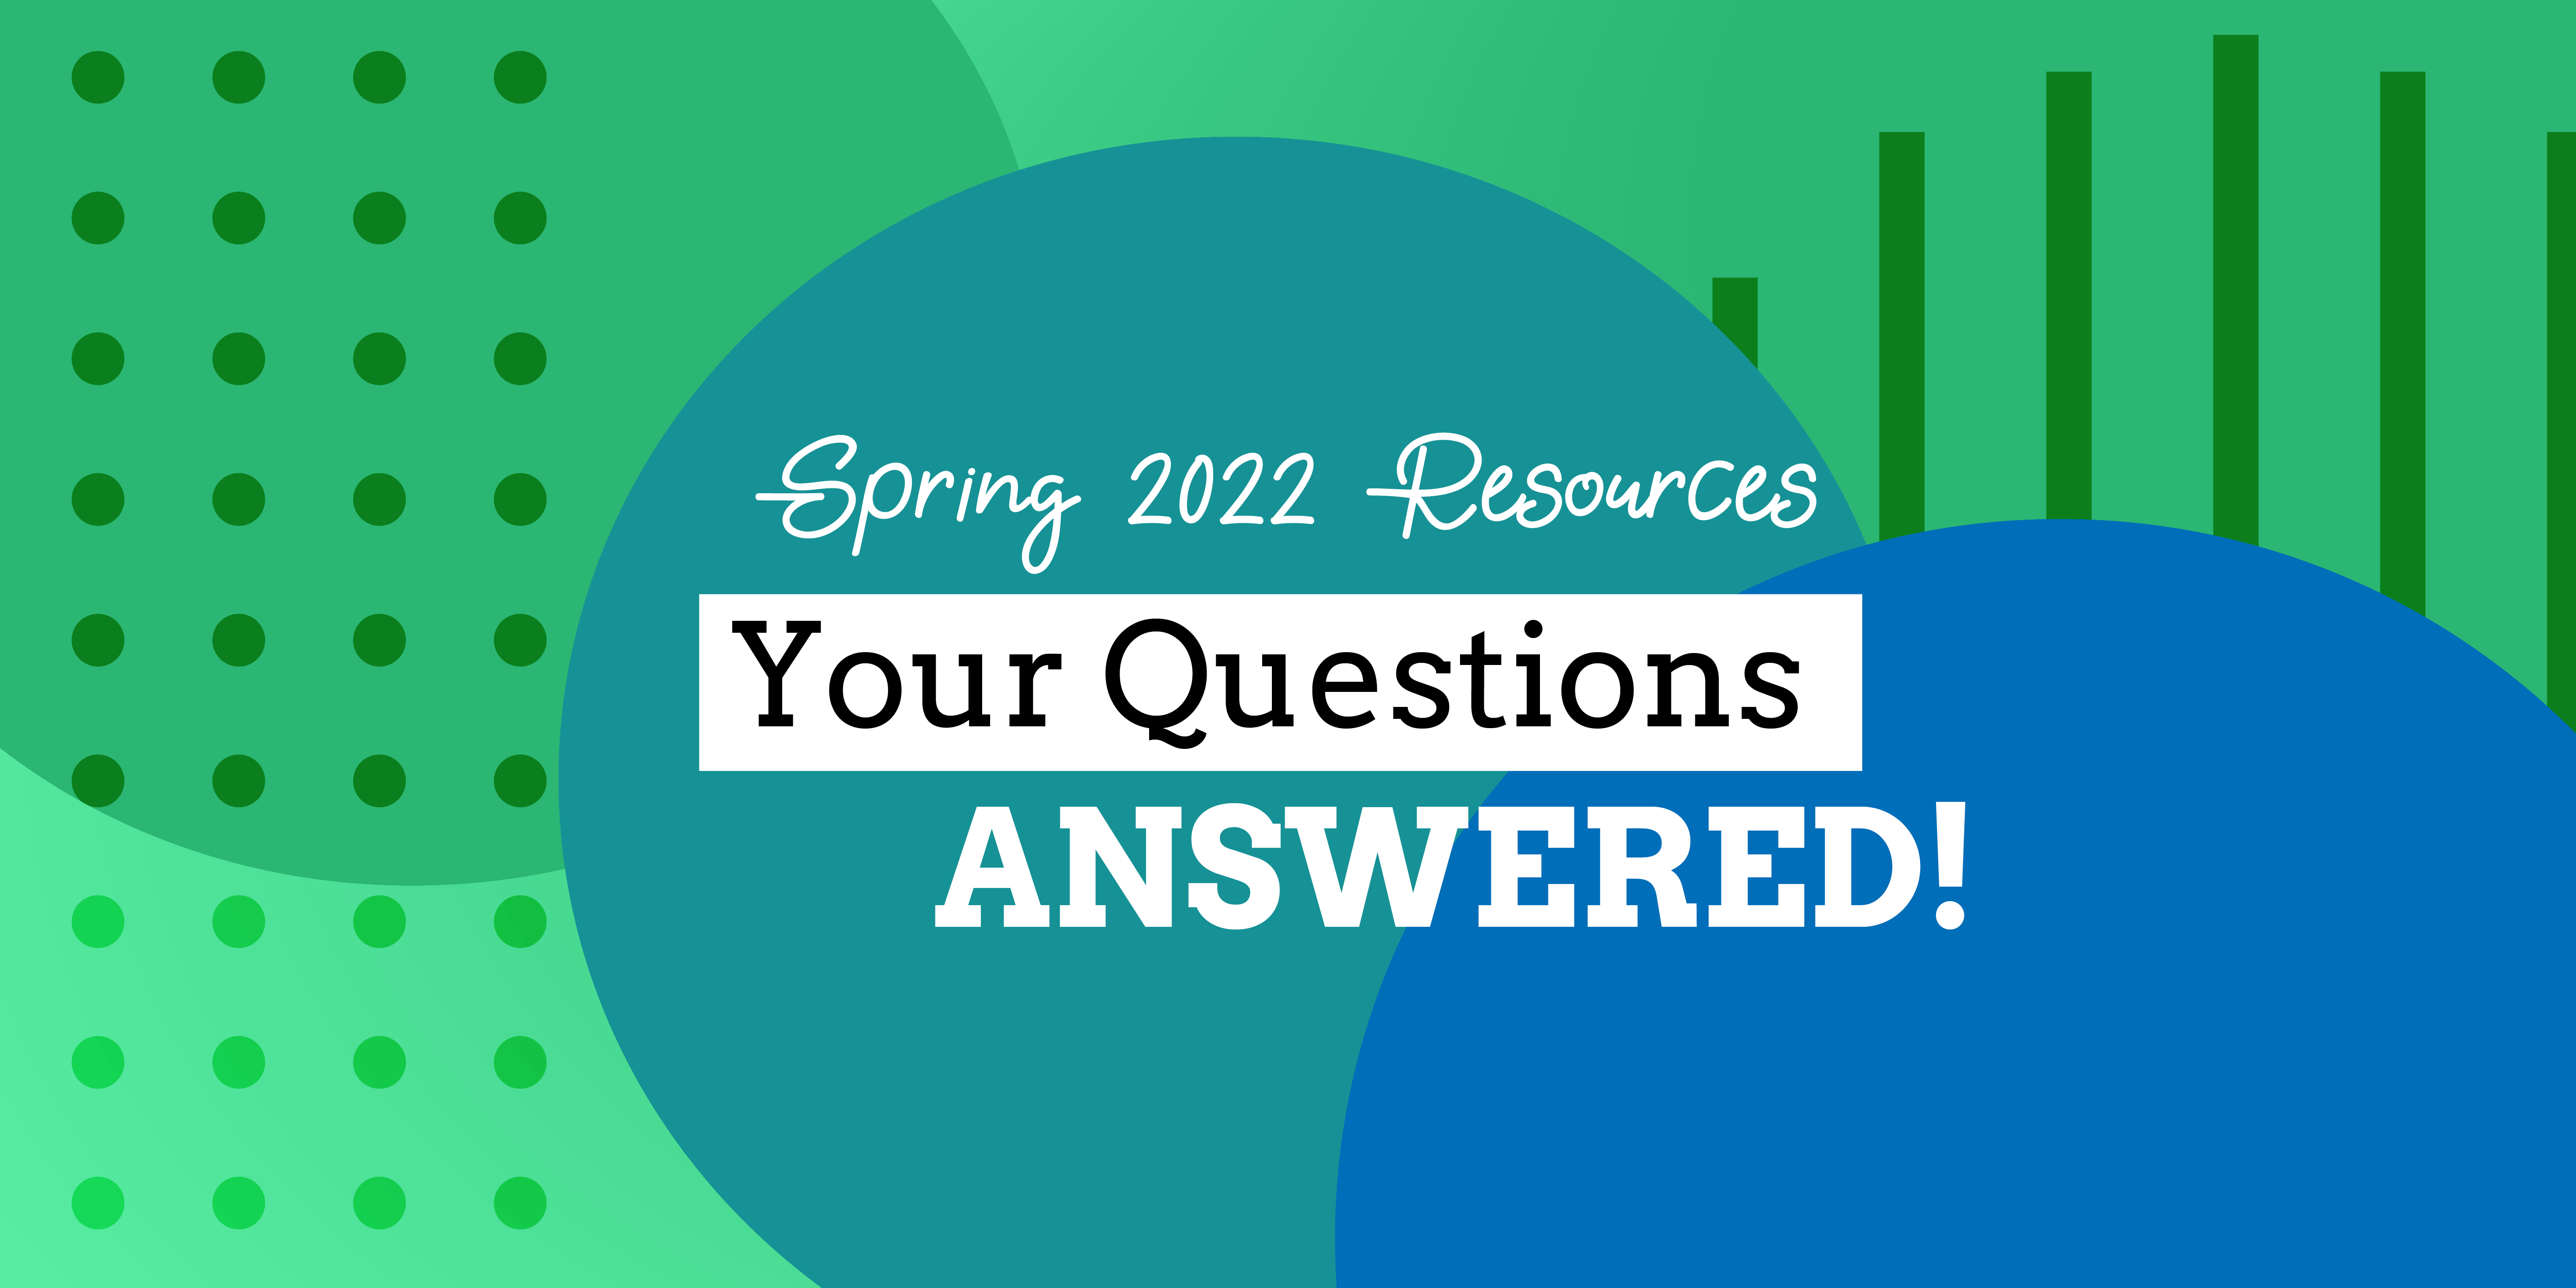 Spring 2022 Resources Your Questions Answered!